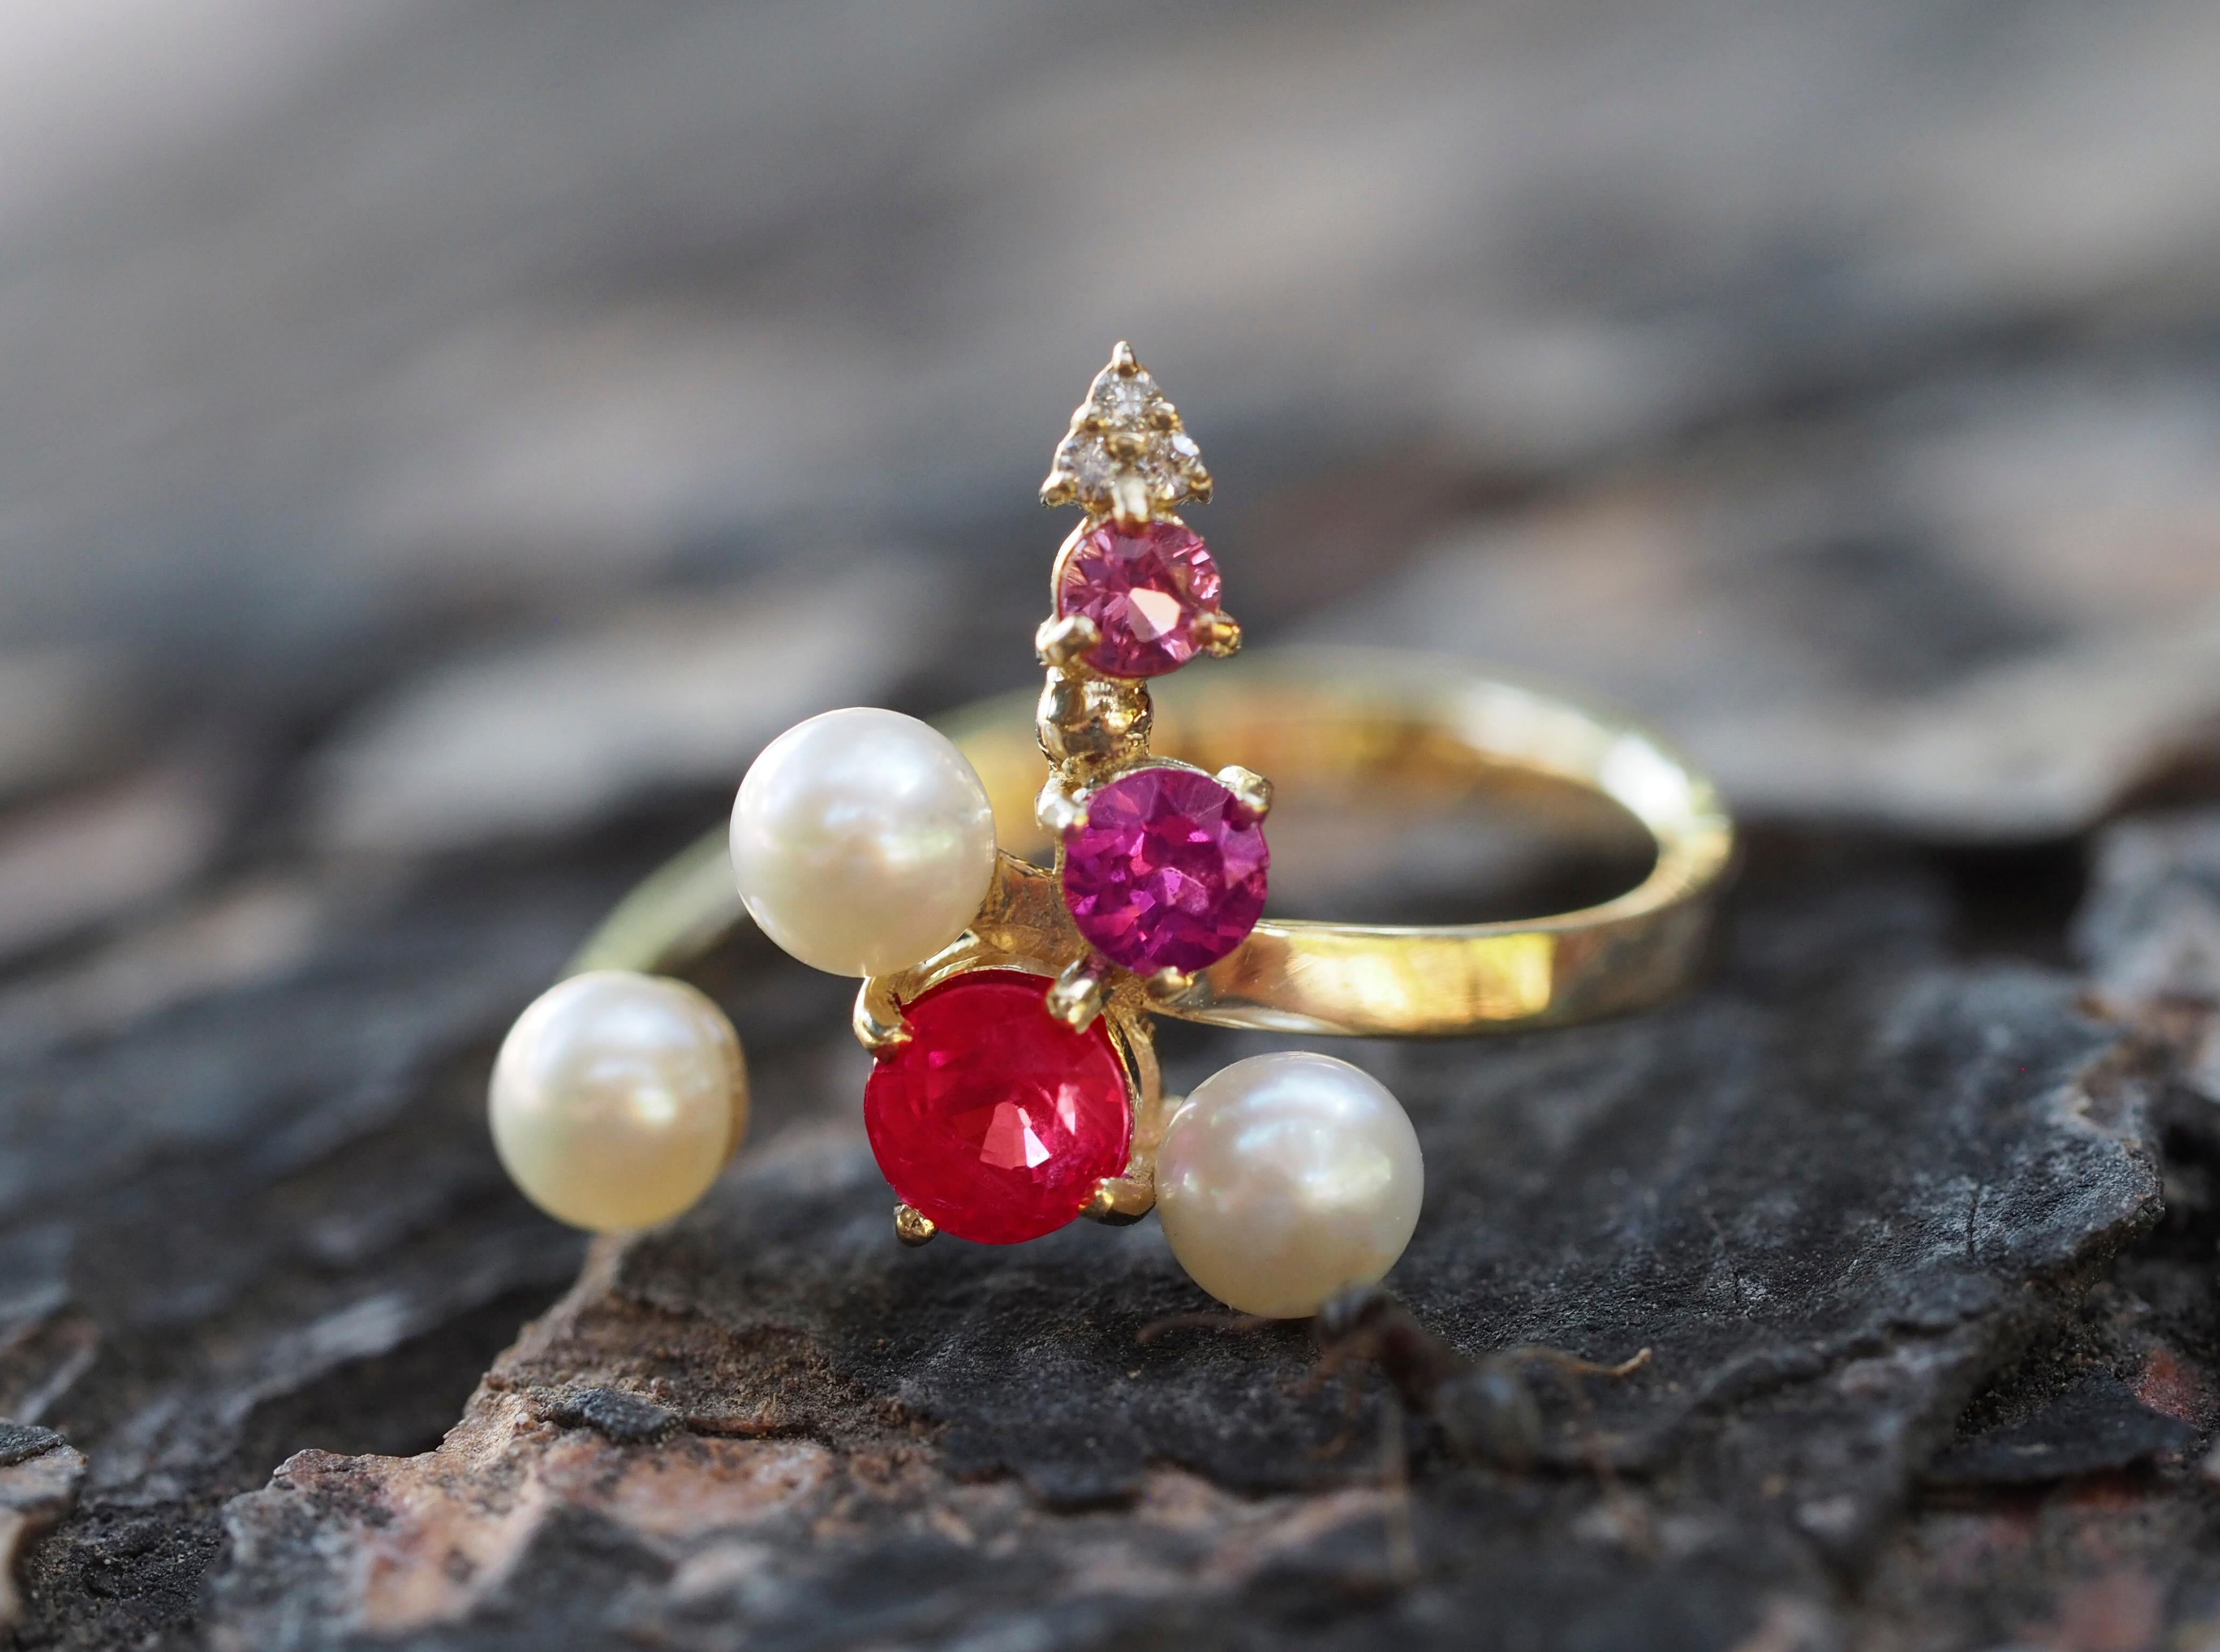 Open ended ring with multicolor gemstones. 
Round ruby 14k gold ring. Ruby, pearl, tourmaline, pearl ring. Ruby adjustable ring.

Metal: 14k gold
Weight: 1.72 g. depends from size.

Central stone: Ruby
Cut: Round
Weight: approx 0.45 ct.
Color: